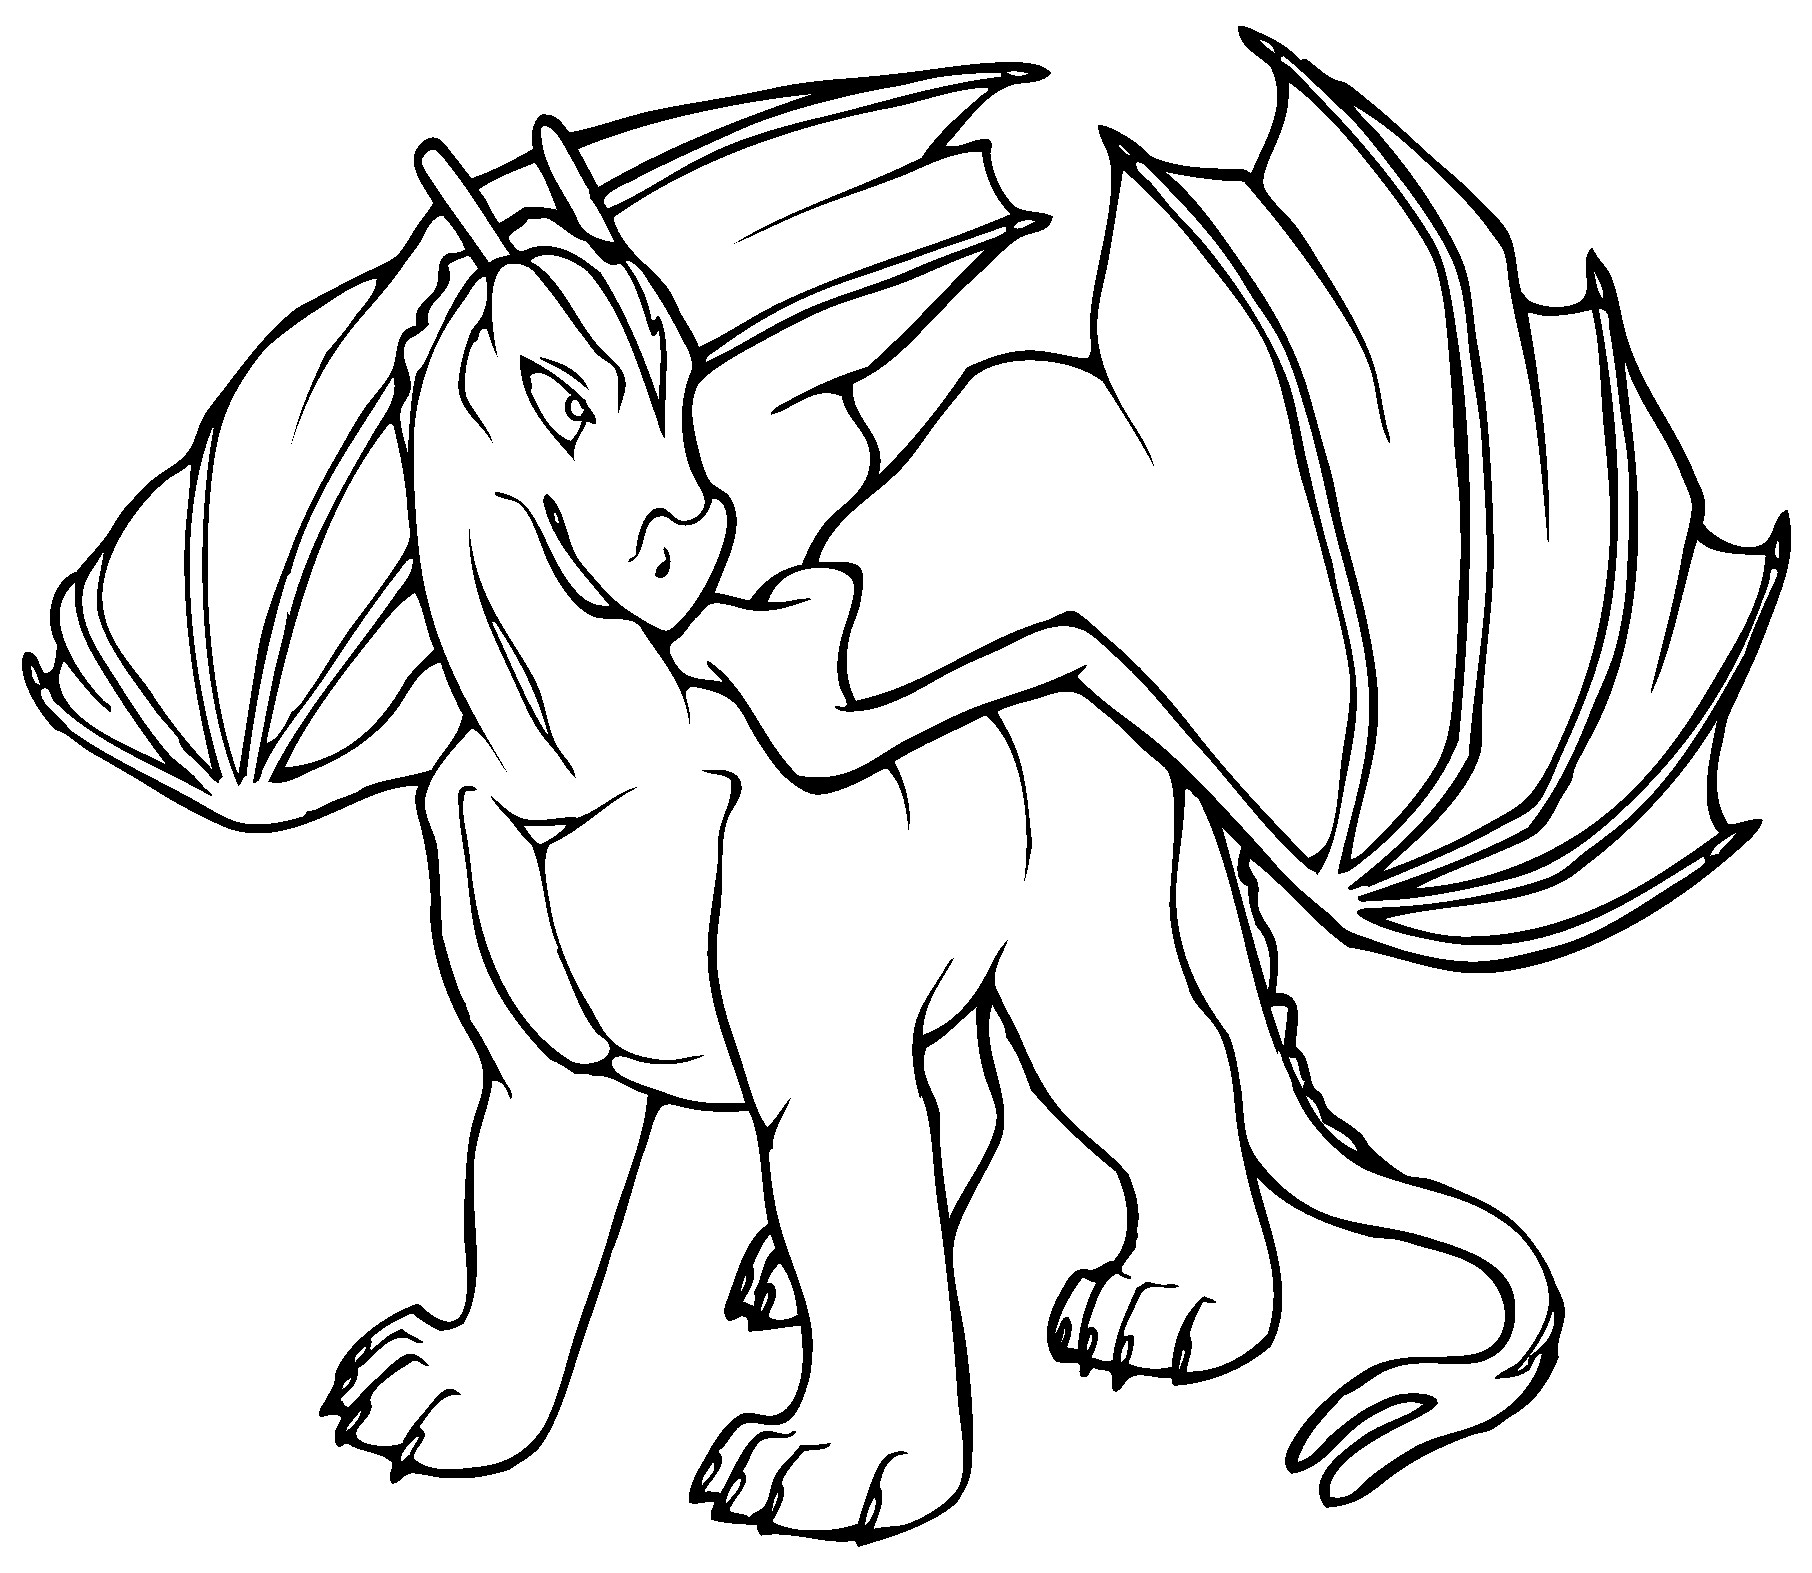 Free Printable Dragon Coloring Pages
 Free Printable Dragon Coloring Pages For Kids